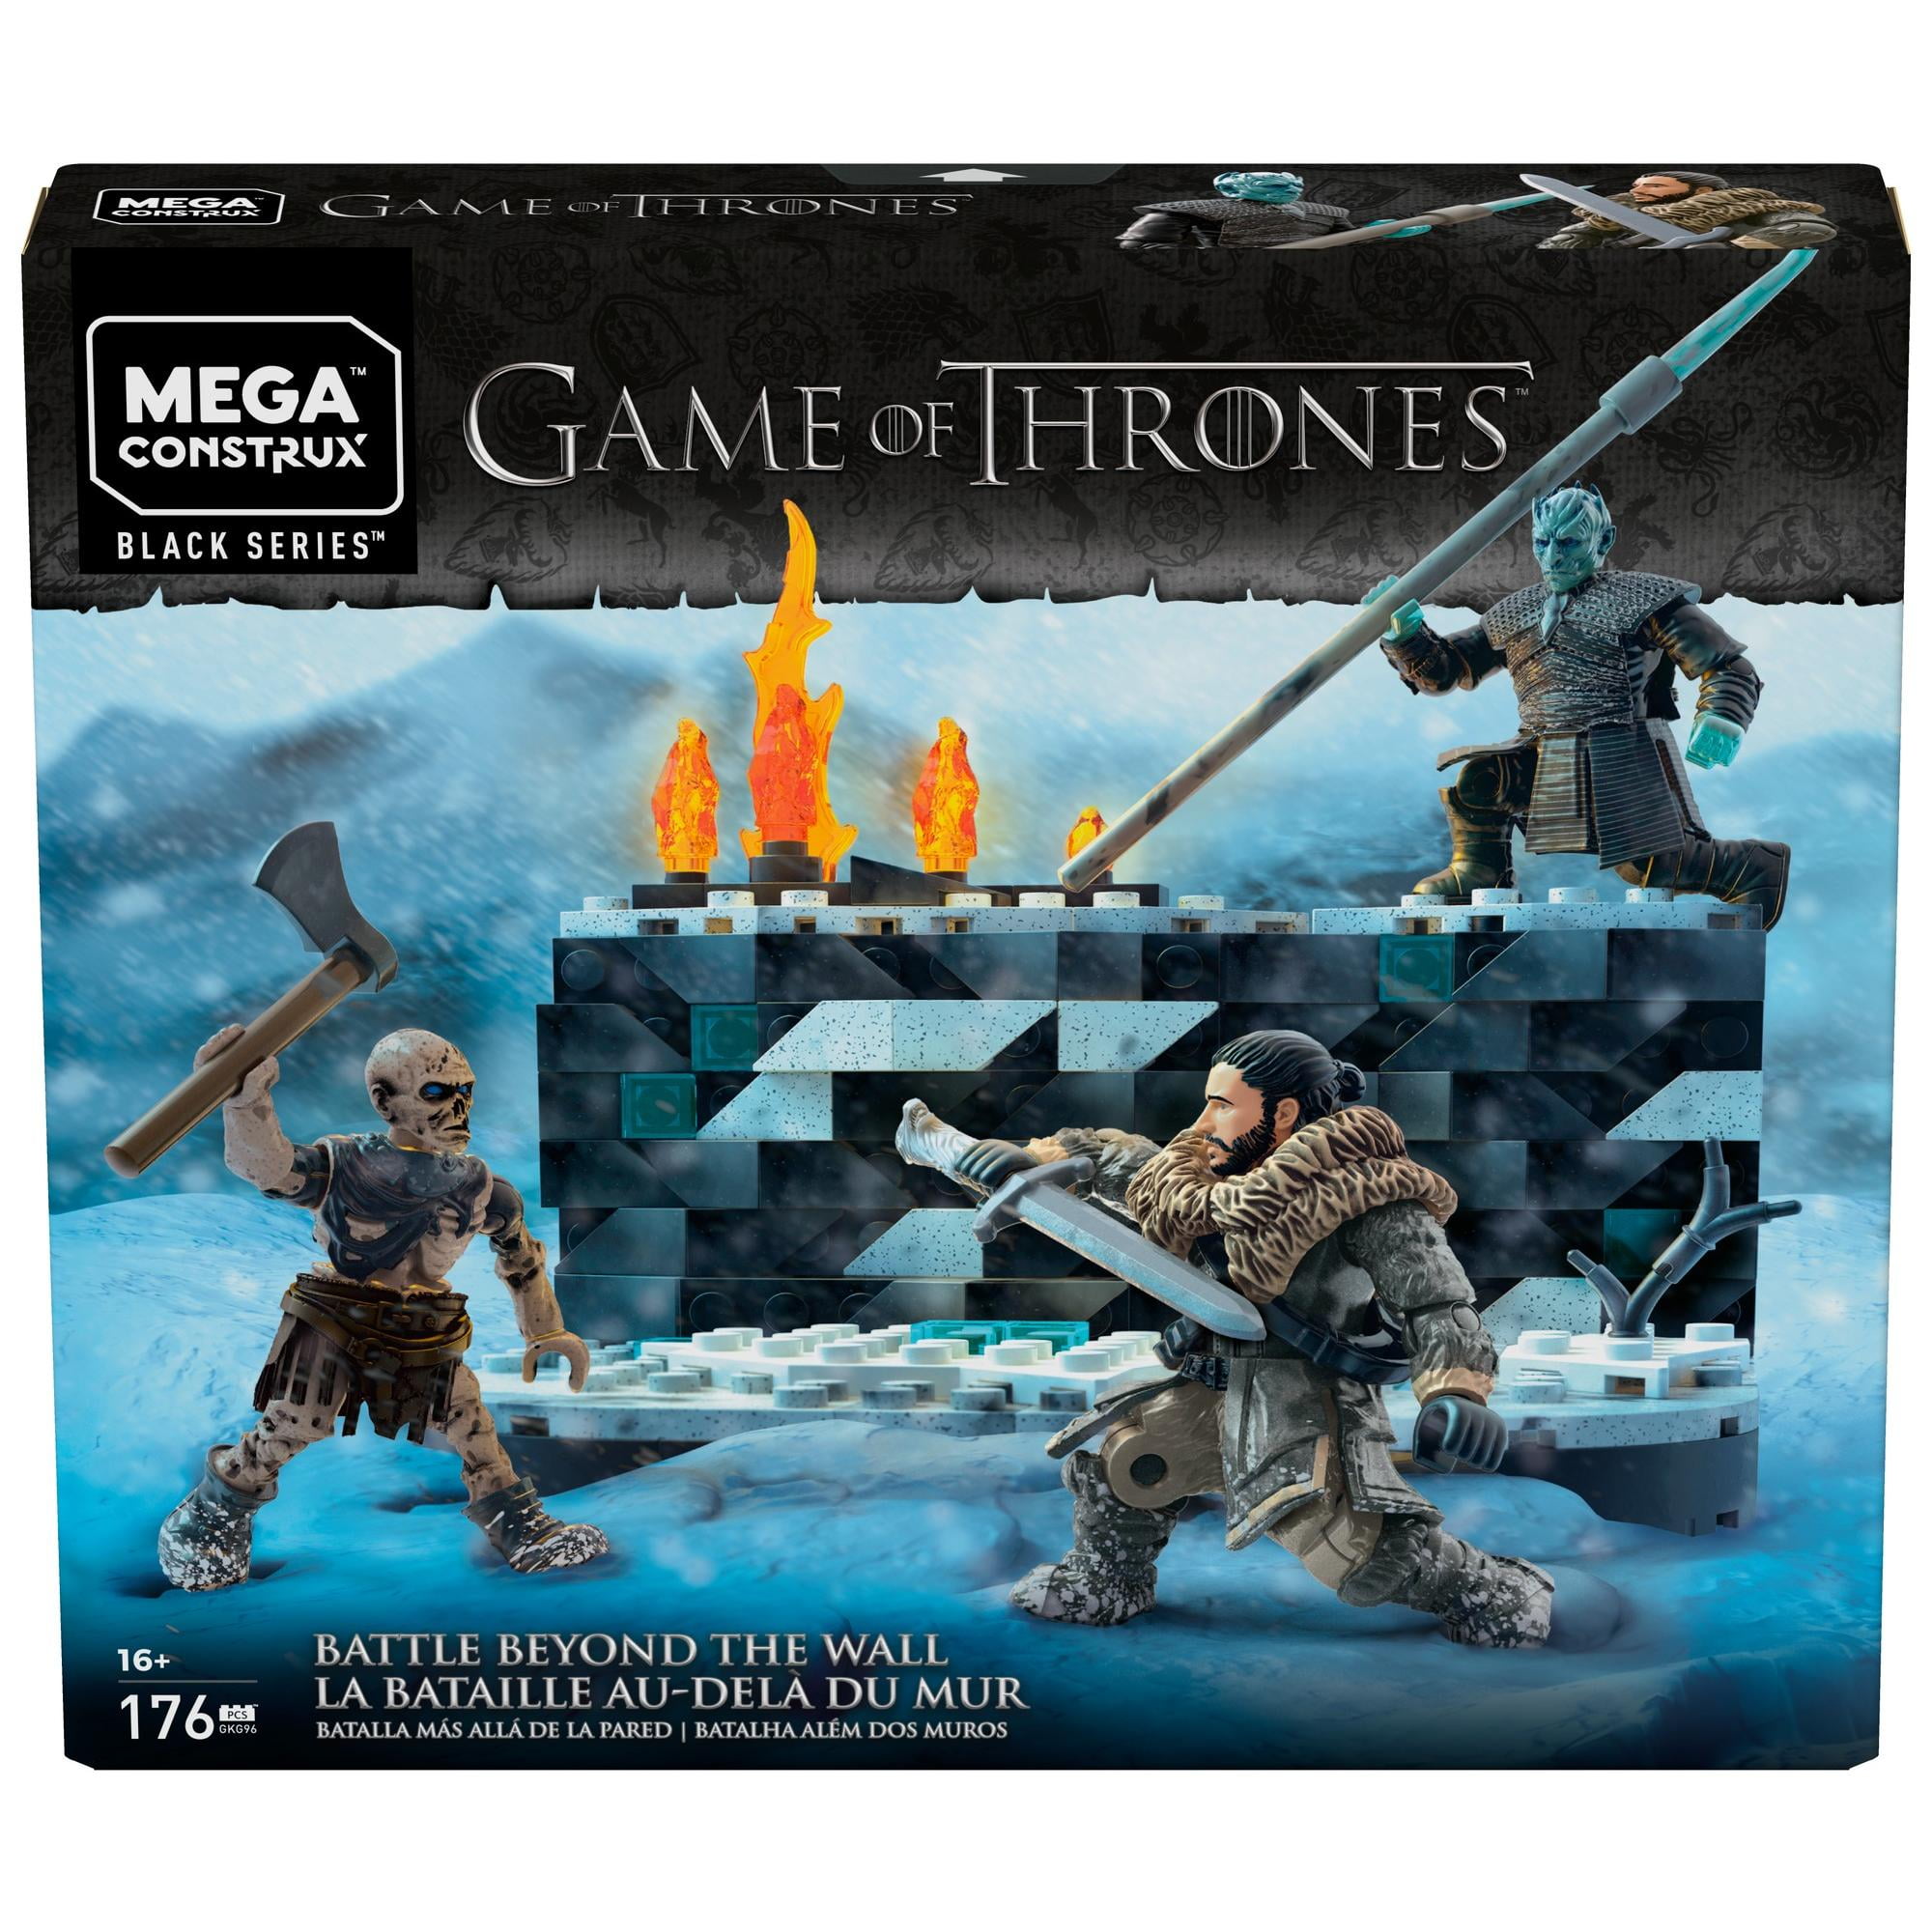 Mega Construx ® Wight Walker figure from Game of Thrones gkg96 LEGO ® compatibile 